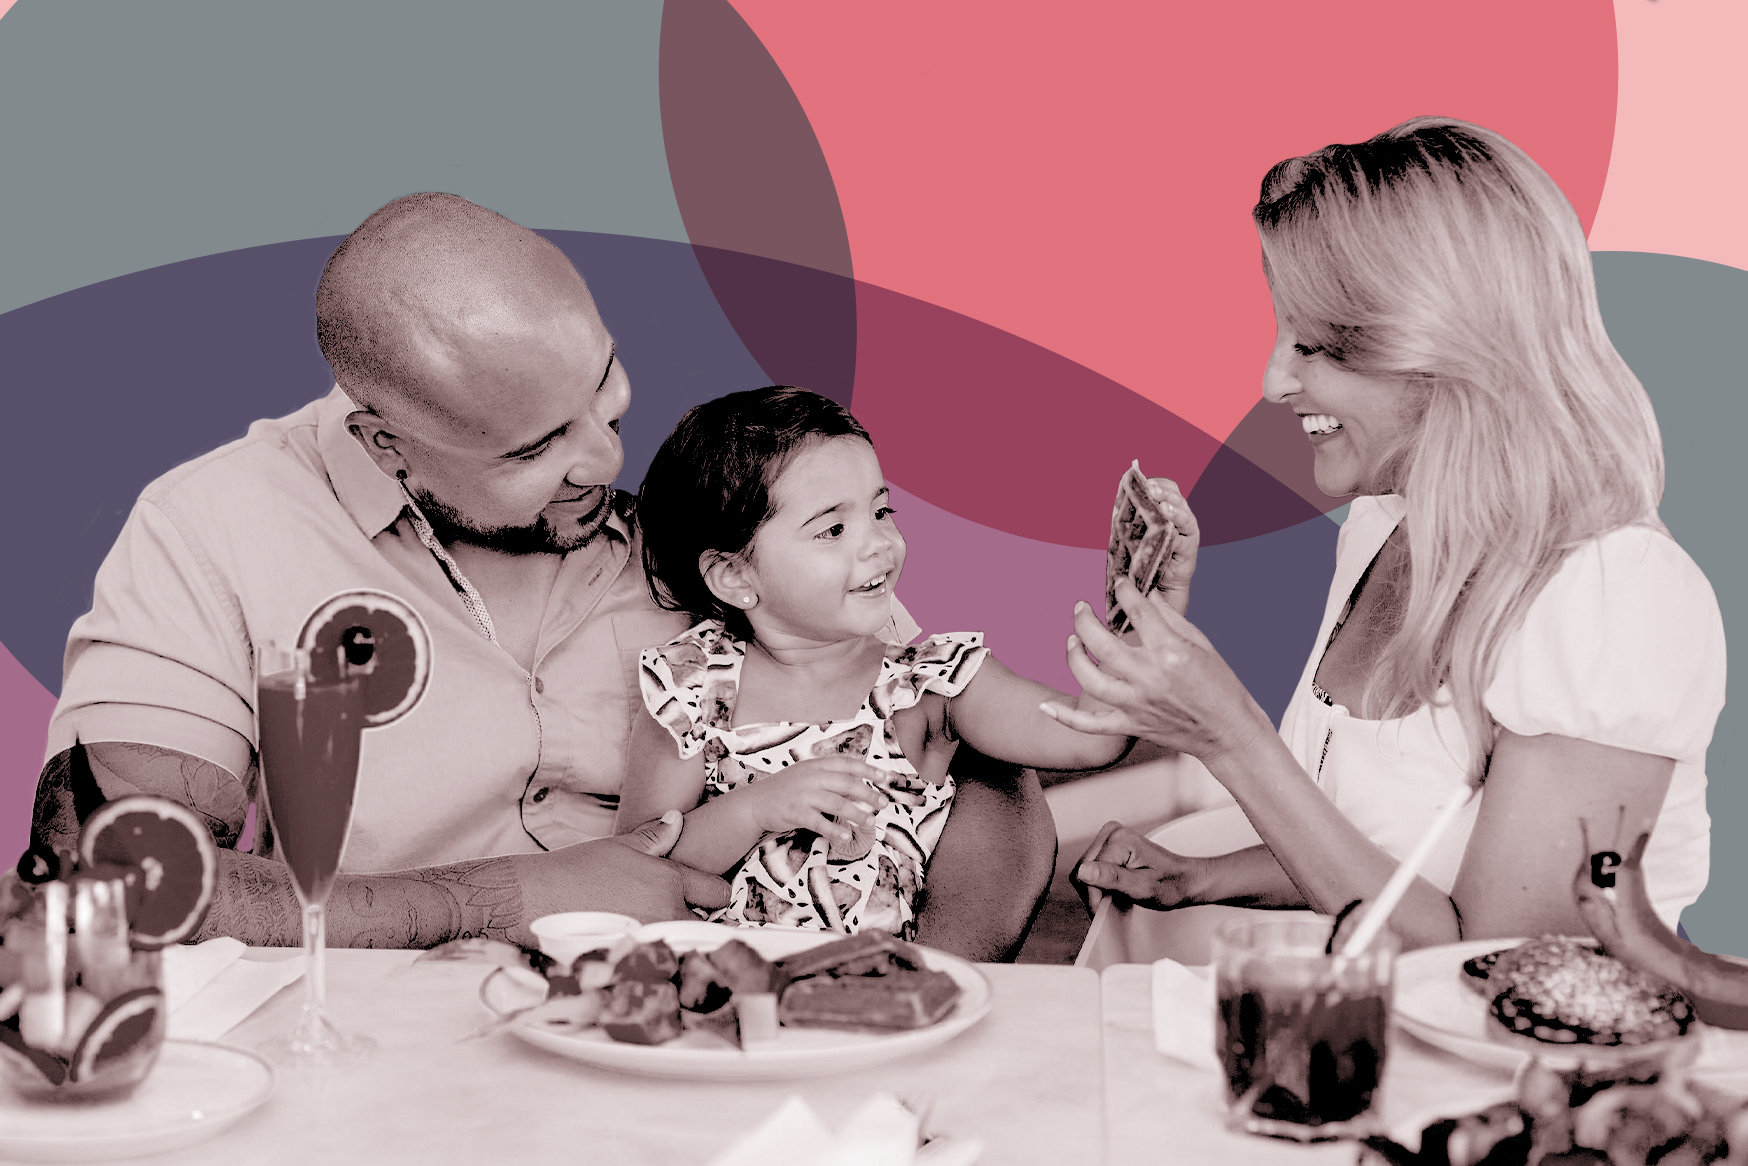 two adults sit at a table full of food with a small child as they smile